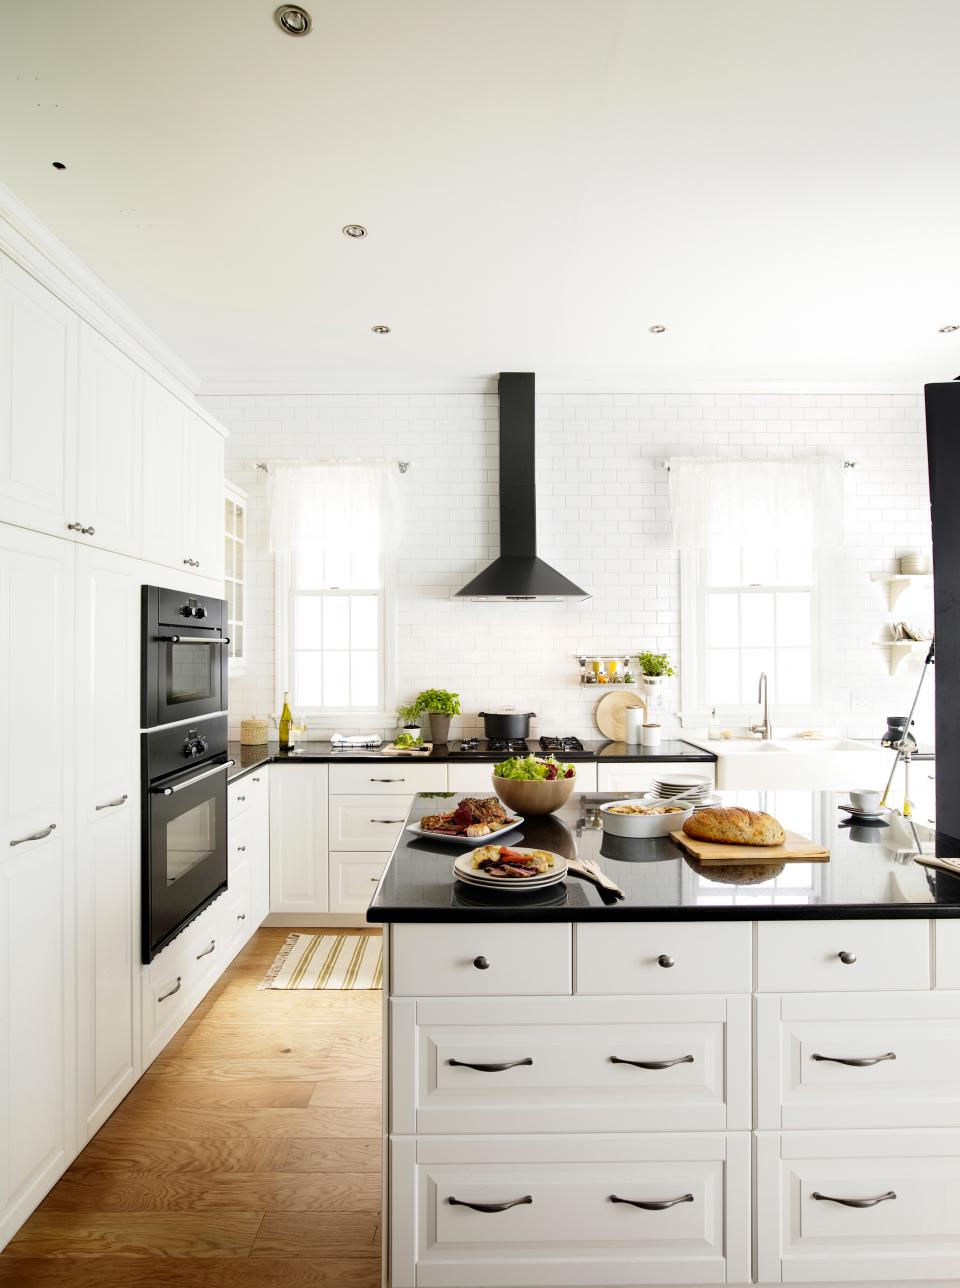 Kitchen Remodels With White Cabinets Pictures | Roy Home Design